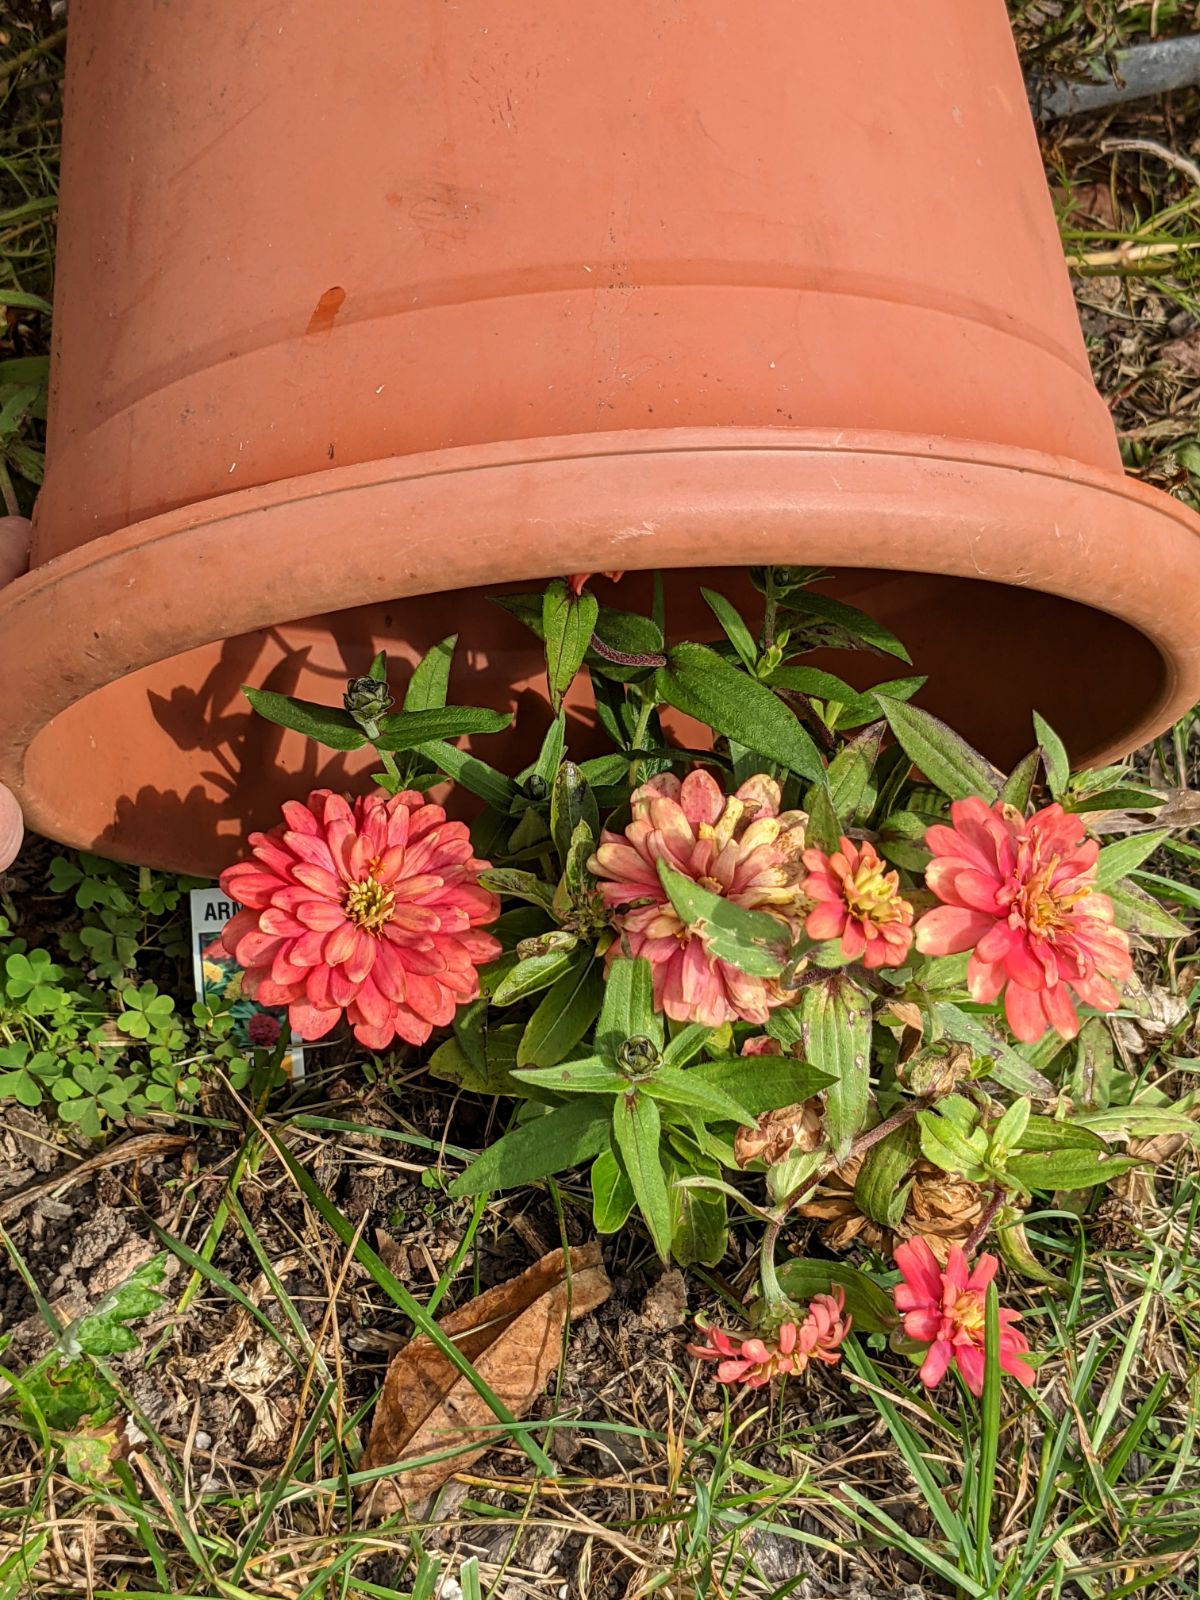 Cover Zinnias with a bucket to prolong their life when frost arrives